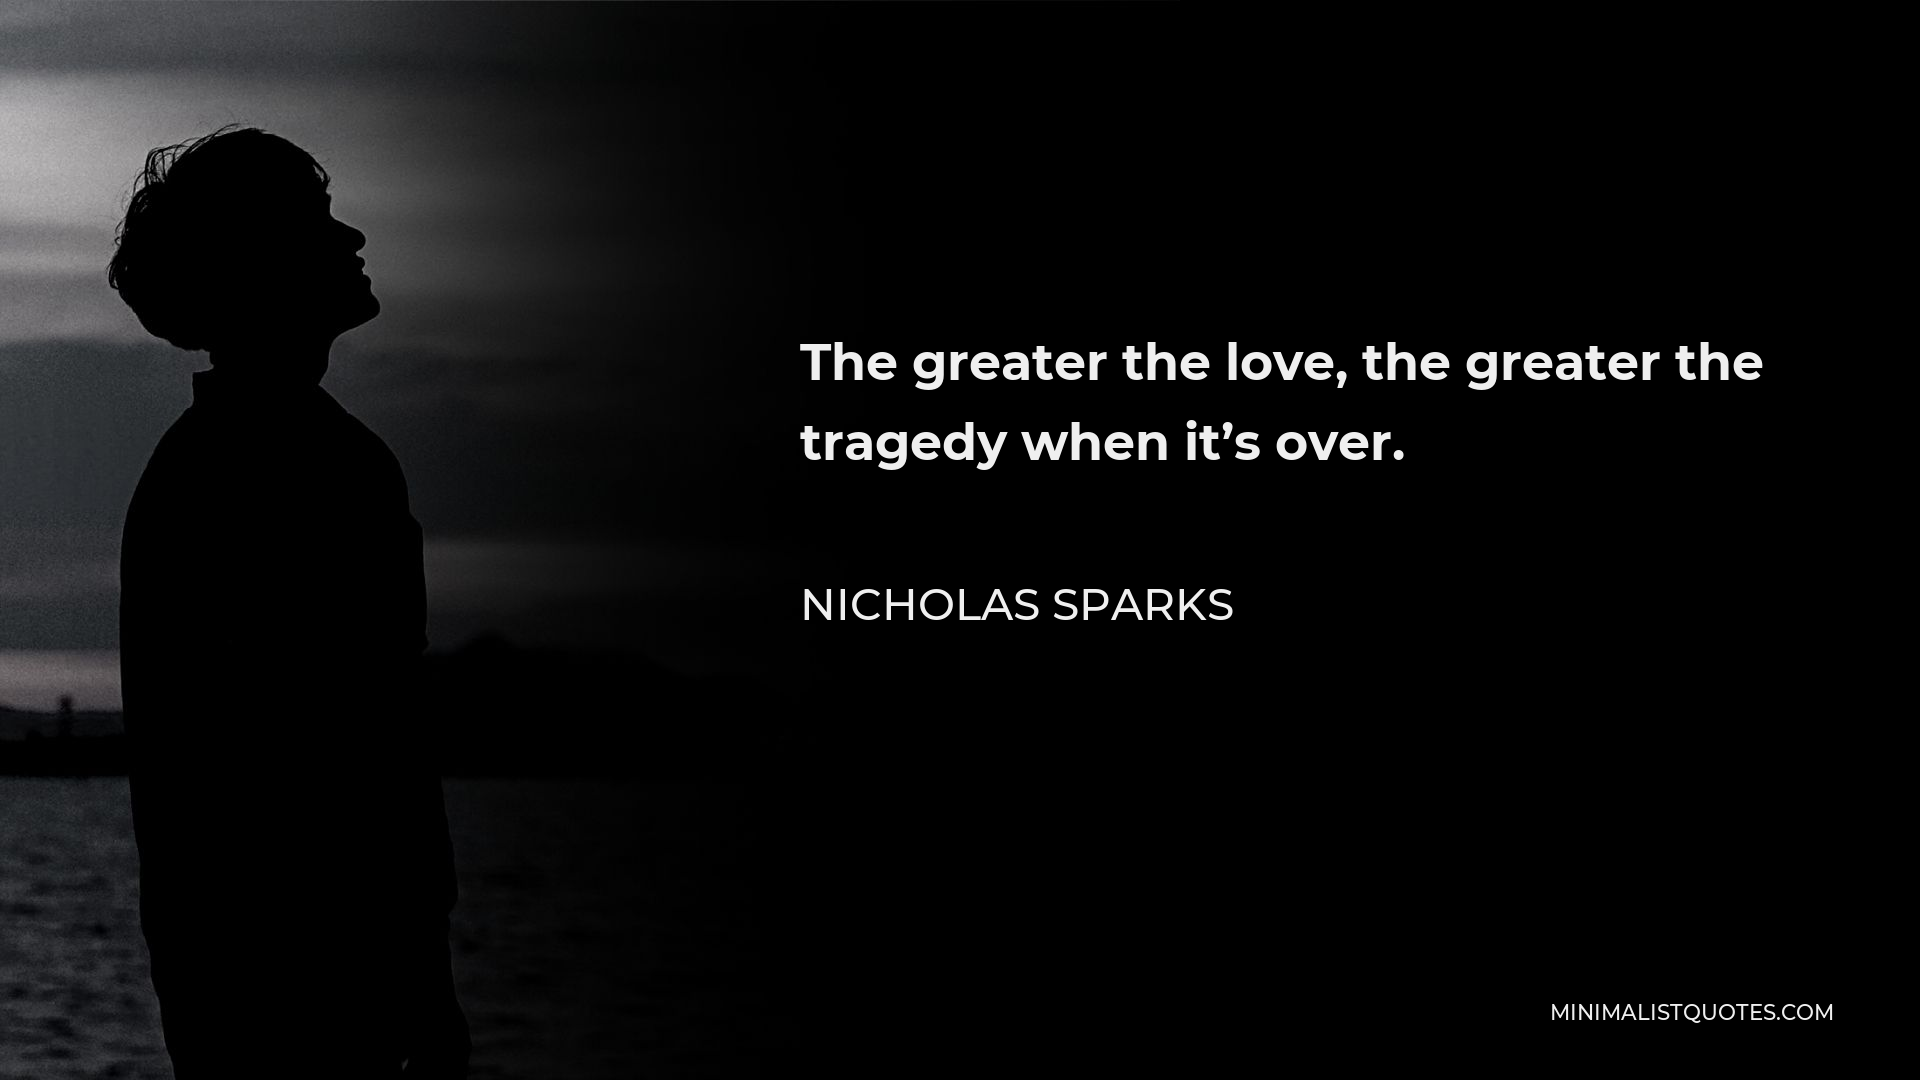 Nicholas Sparks Quote - The greater the love, the greater the tragedy when it’s over.